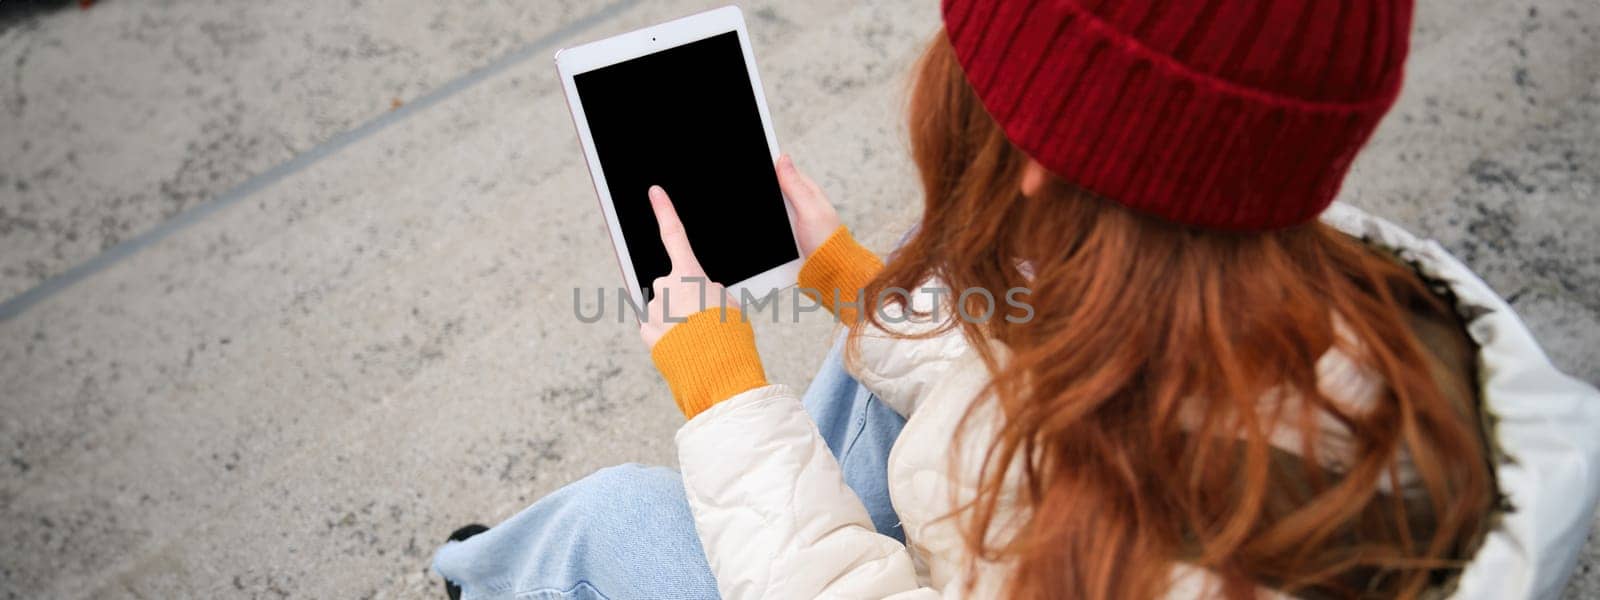 Rear view of redhead girl touches digital tablet screen, touchpad, texts message, uses internet application on gadget, sits on stairs outdoors.